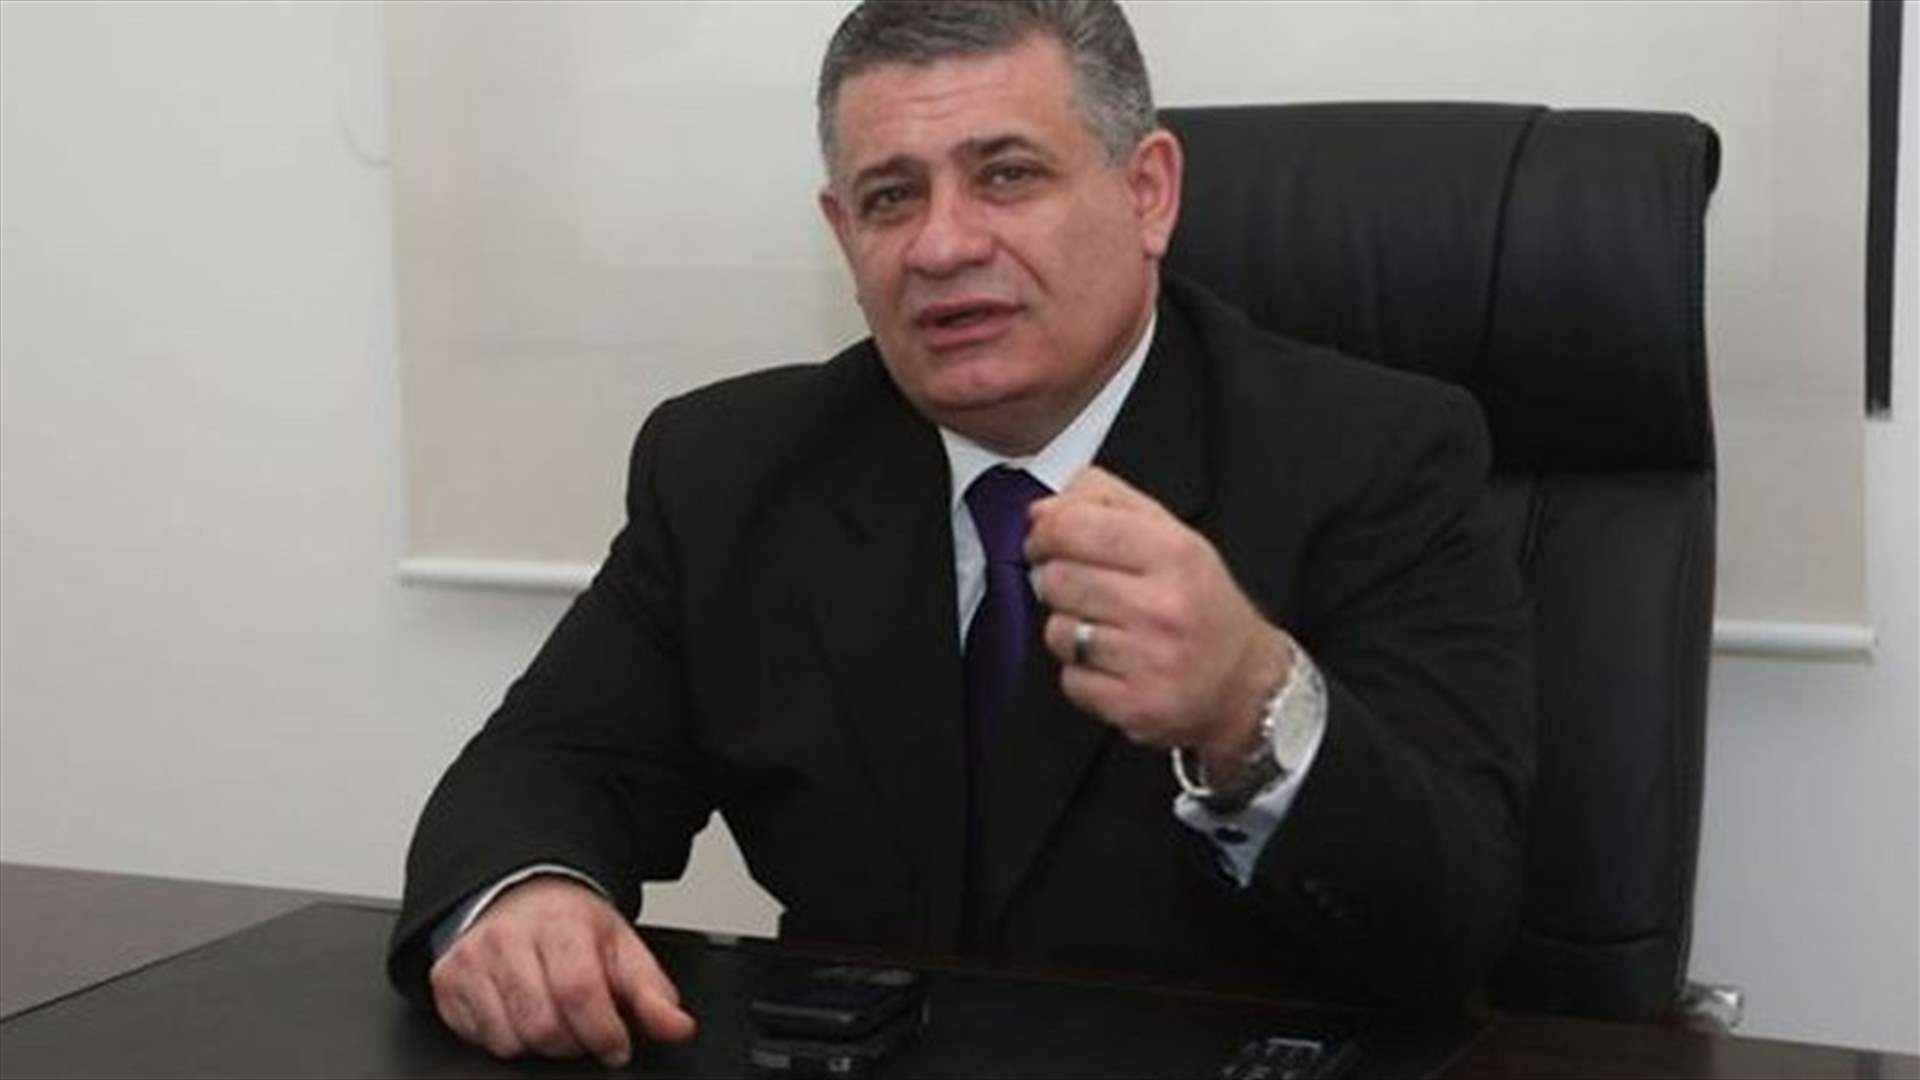 Nawfal Daou announces withdrawal from electoral race